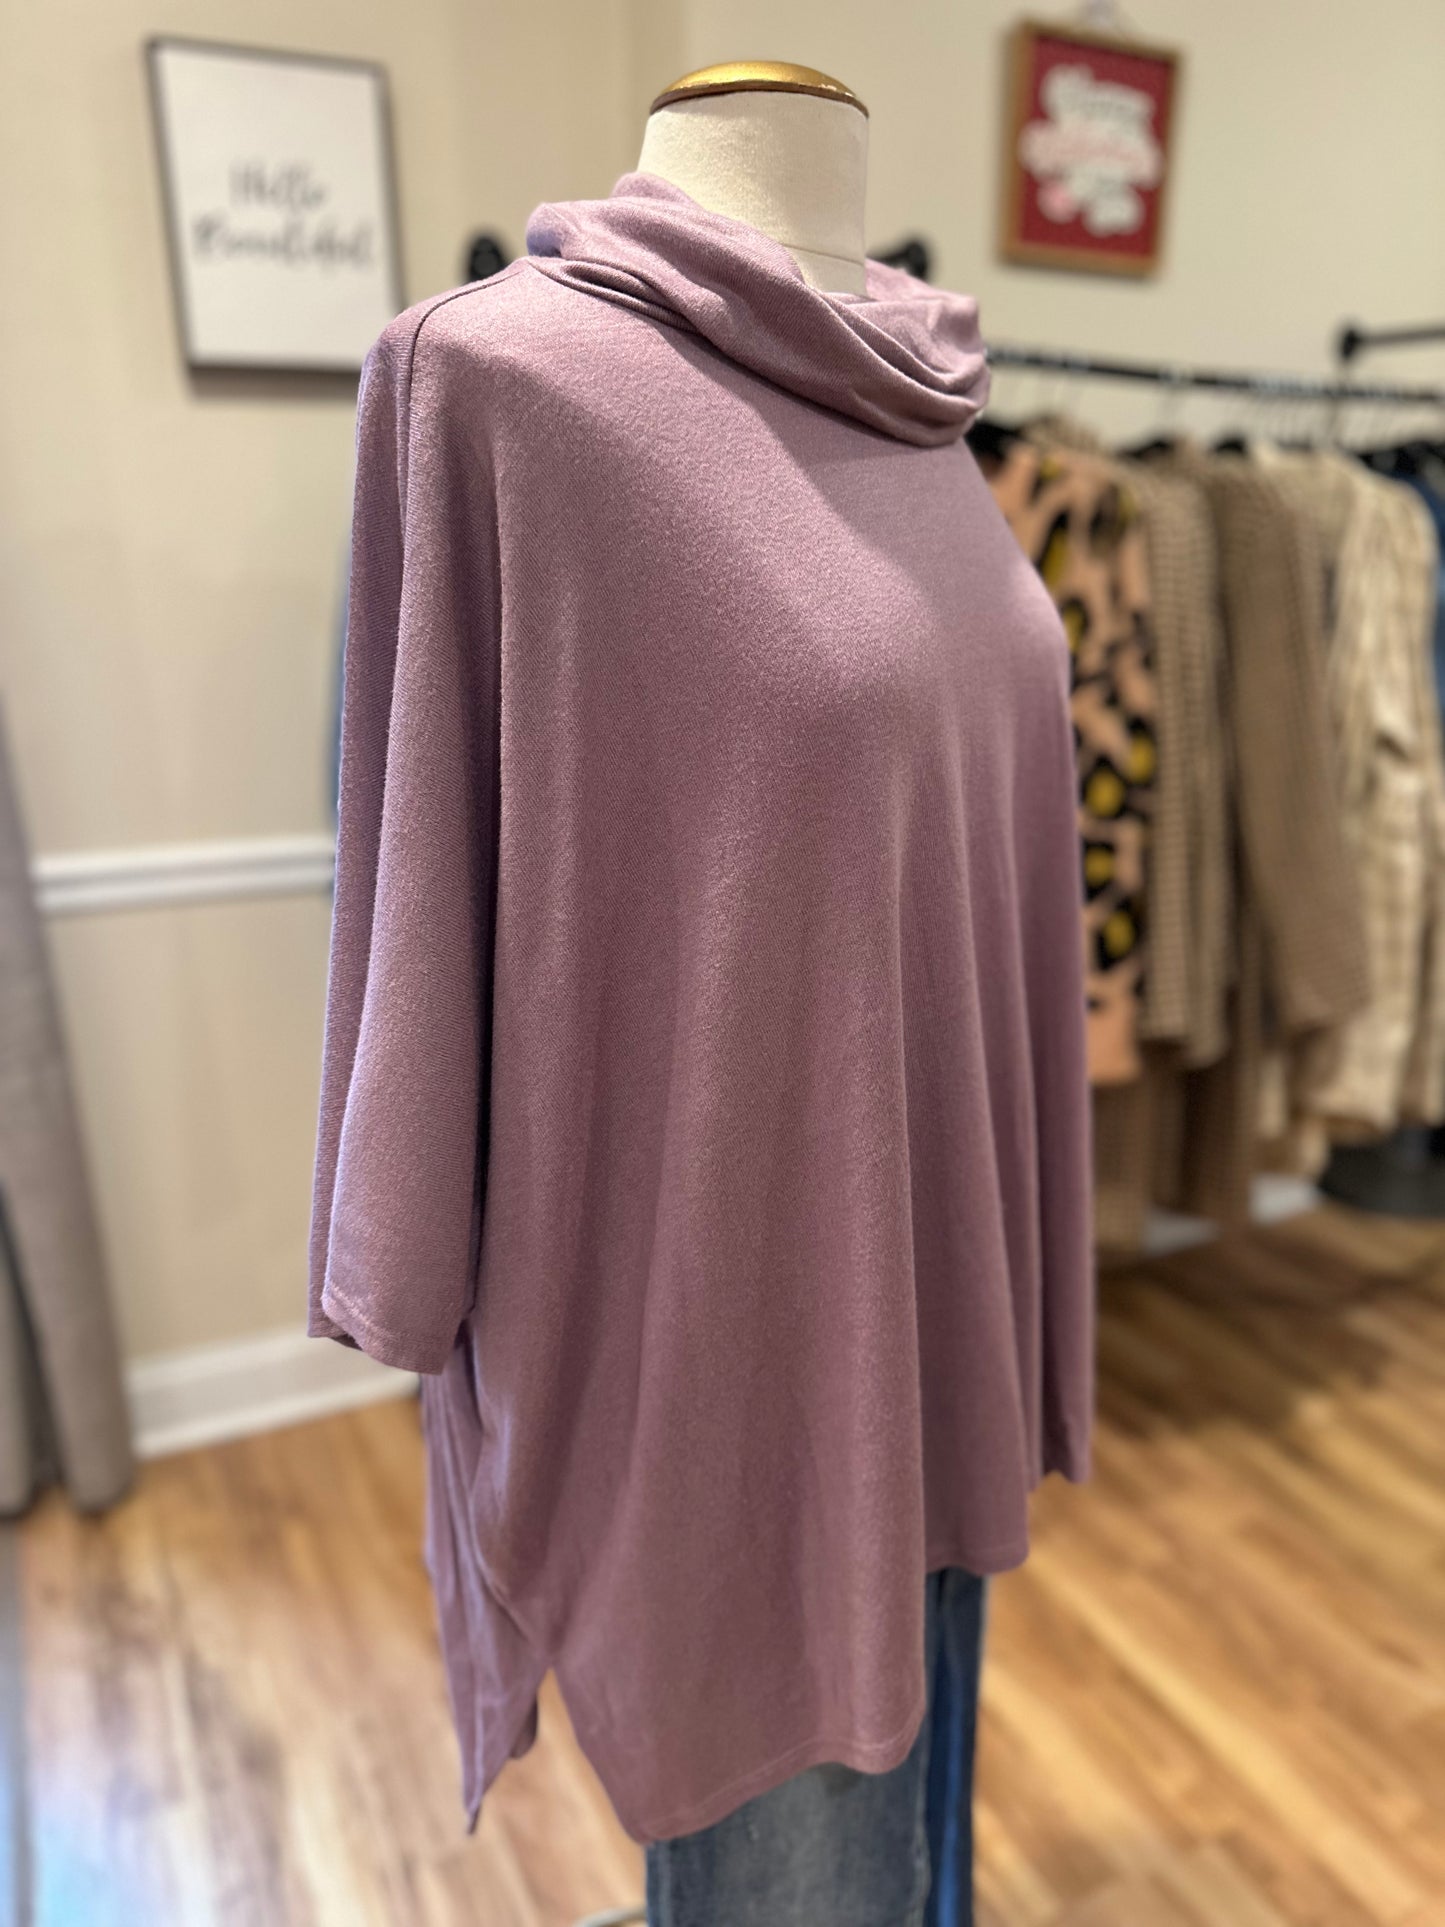 Pixi & Ivy Poncho Top in Orchid